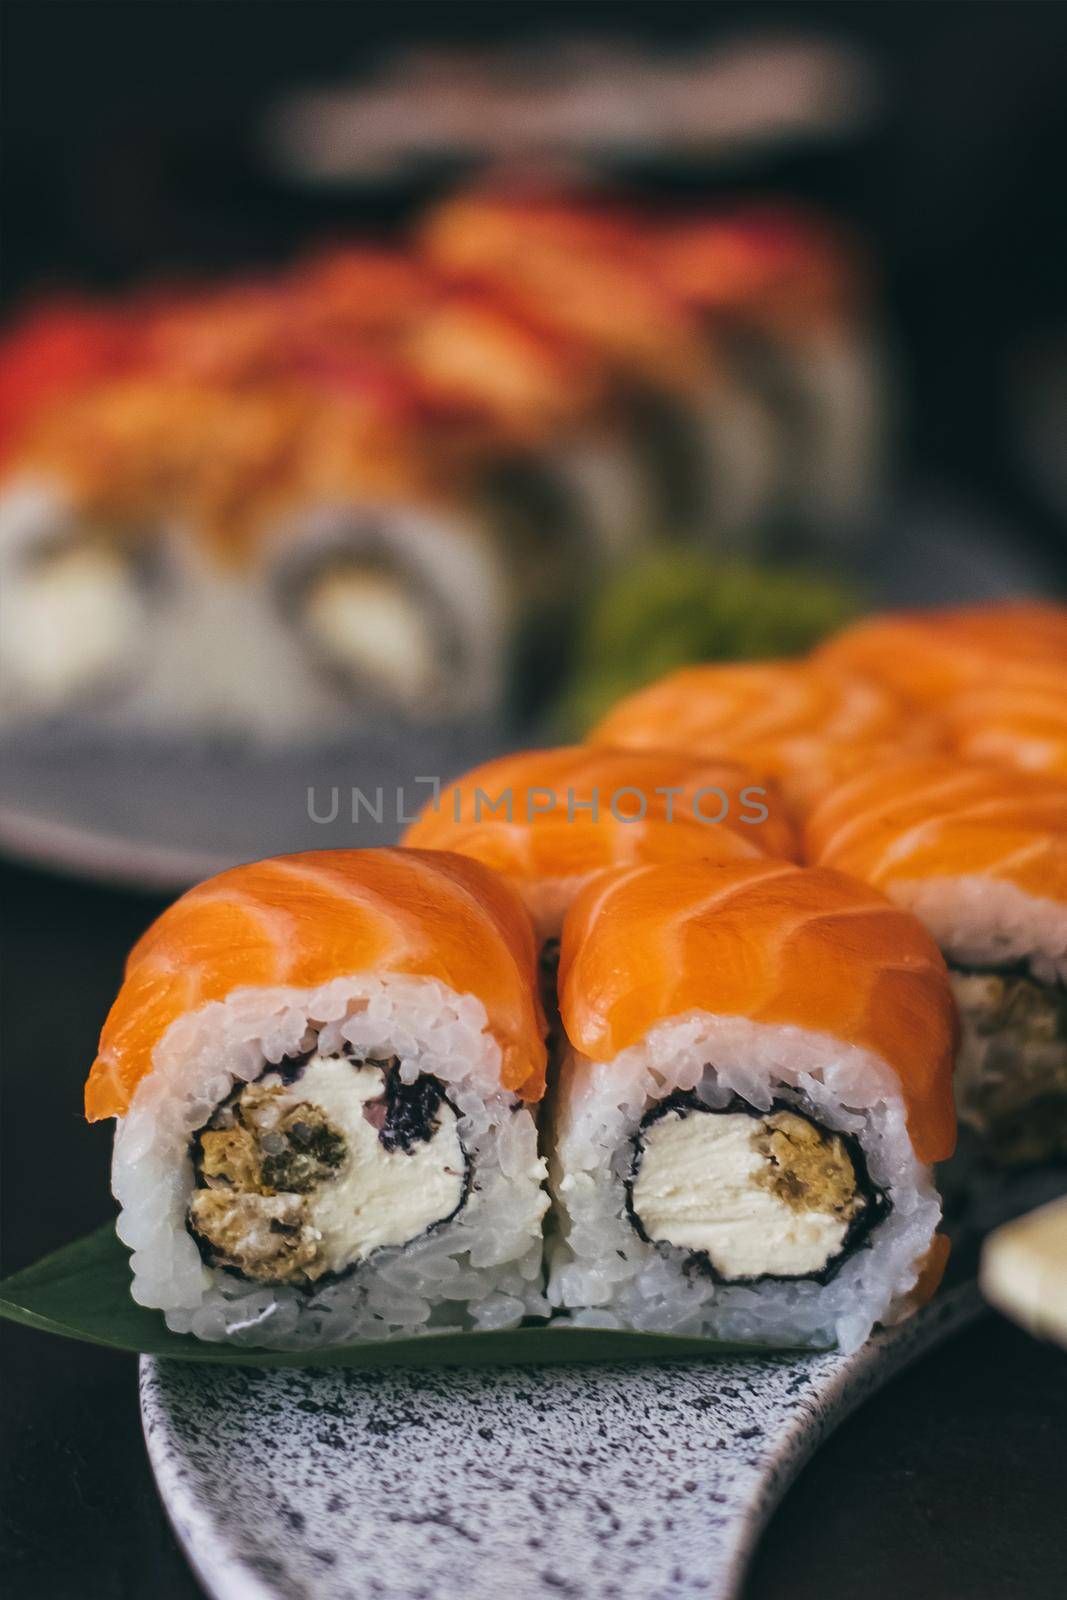 Sushi with salmon, cream cheese Philadelphia, cucumber and wasabi by mmp1206